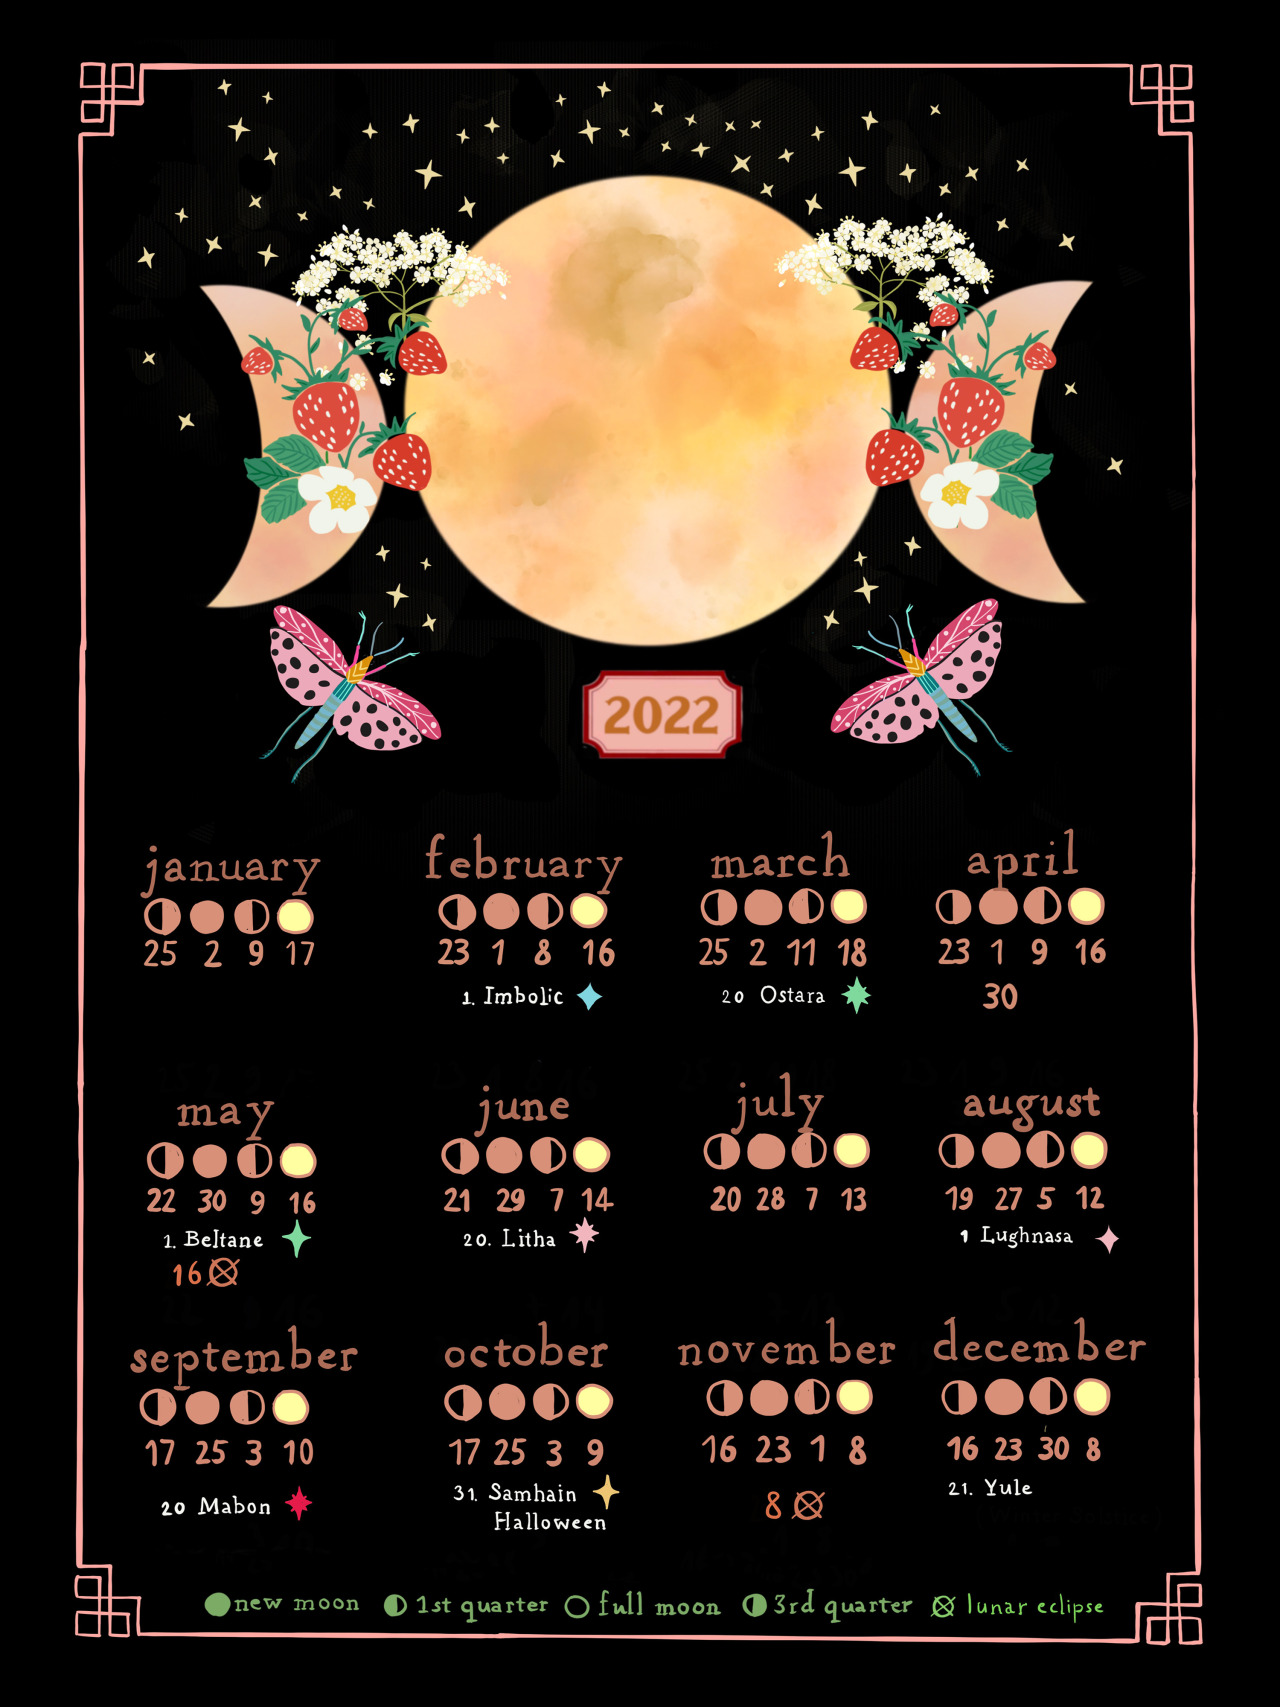 Taika Tori Art Illustration Maps Travel Writing Travel Photo I Have Been Hand Drawing This Moon Phases Calendar